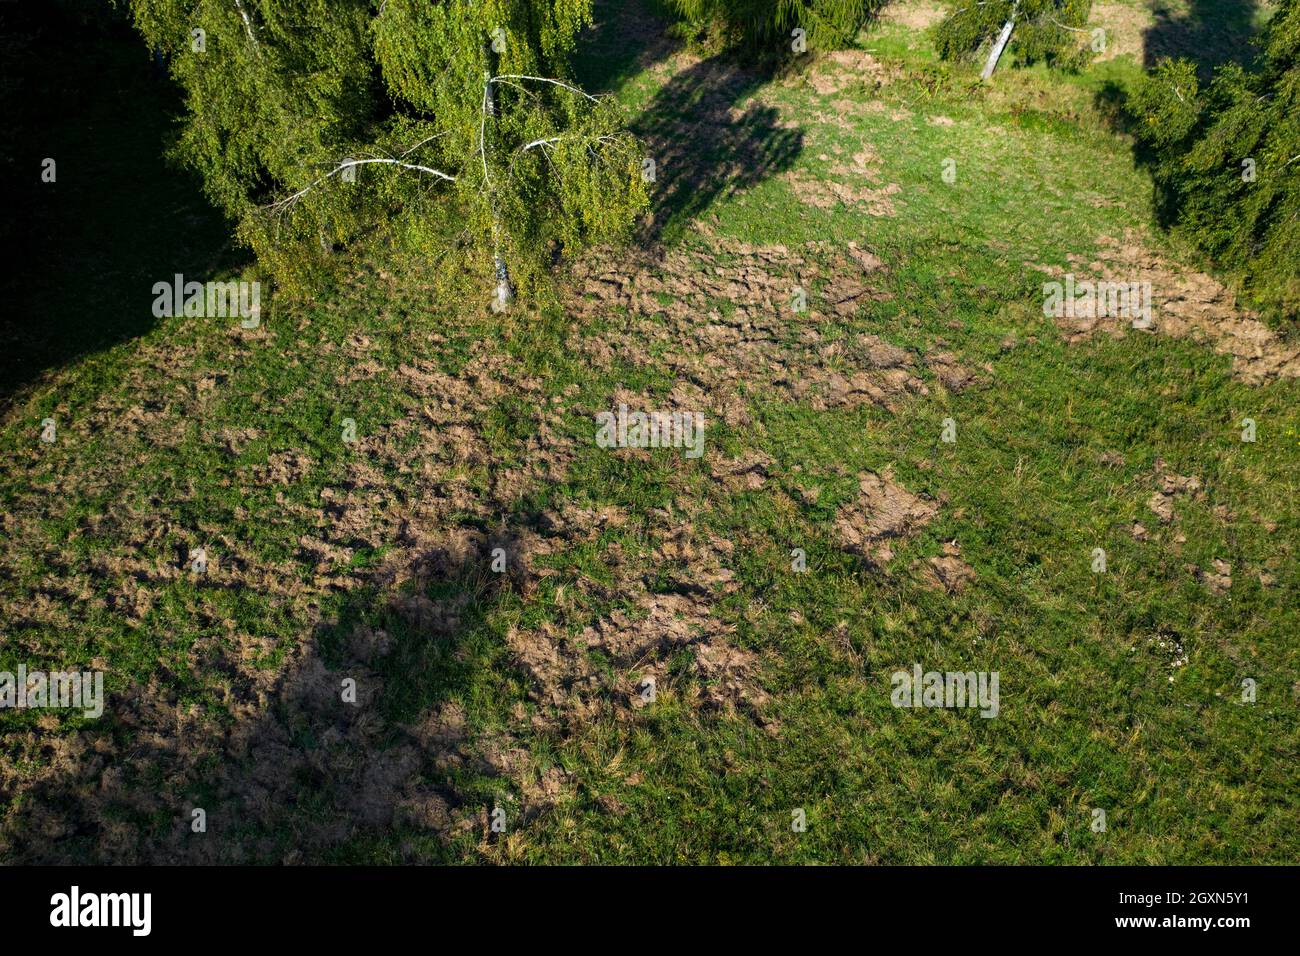 Survey  Farmland damage to the turf caused by overpopulation of wild boars in high mountain pastures Stock Photo